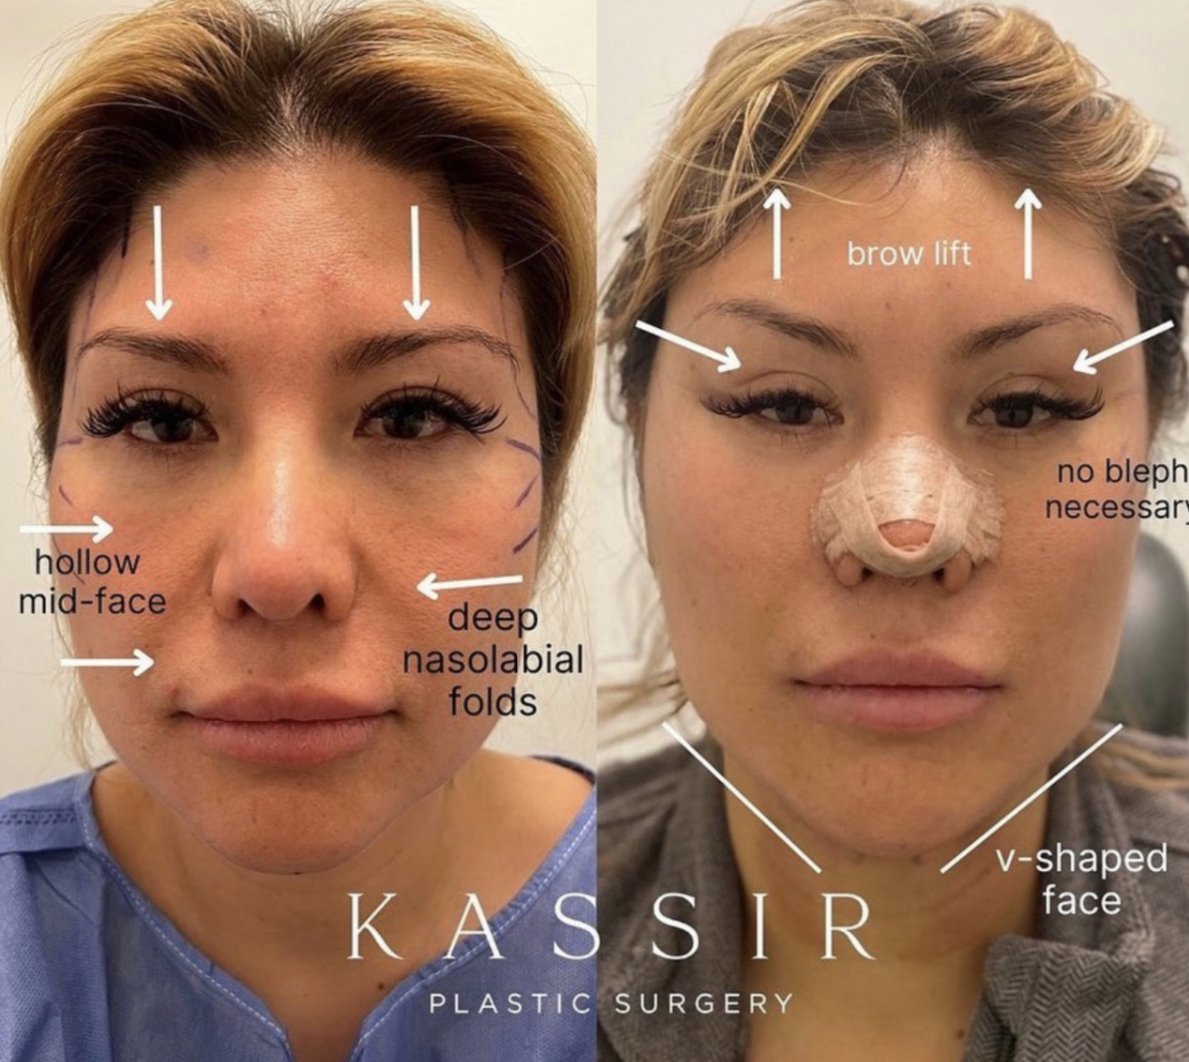 Face & Brow Lift WITHOUT any Scars - One Stitch Lift™ — Kassir